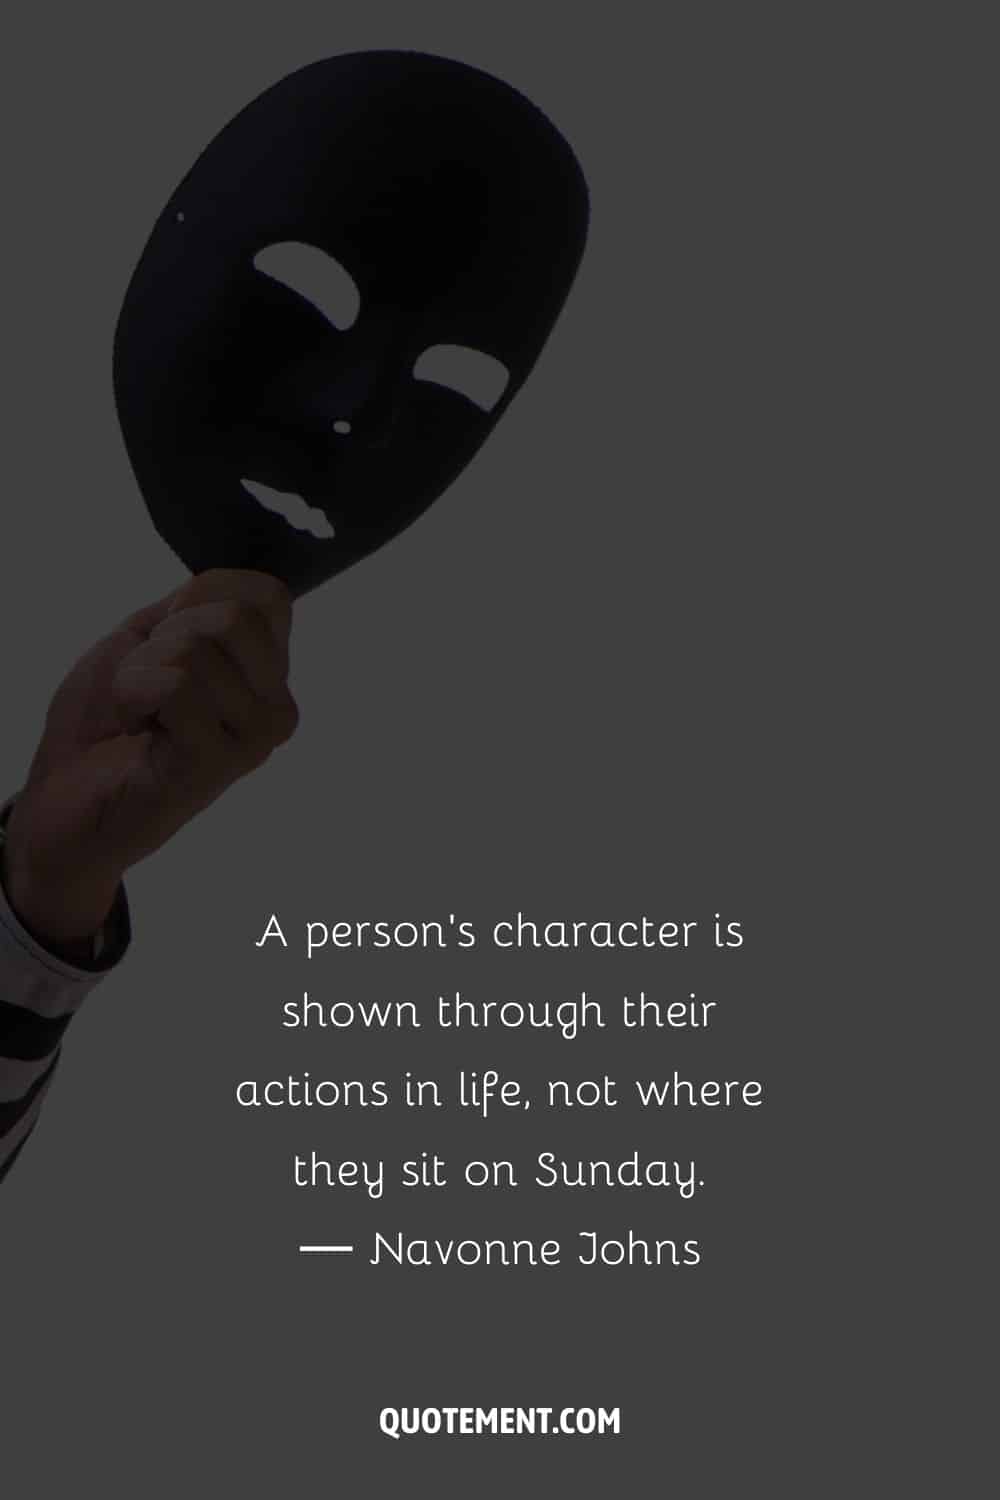 A person’s character is shown through their actions in life, not where they sit on Sunday.